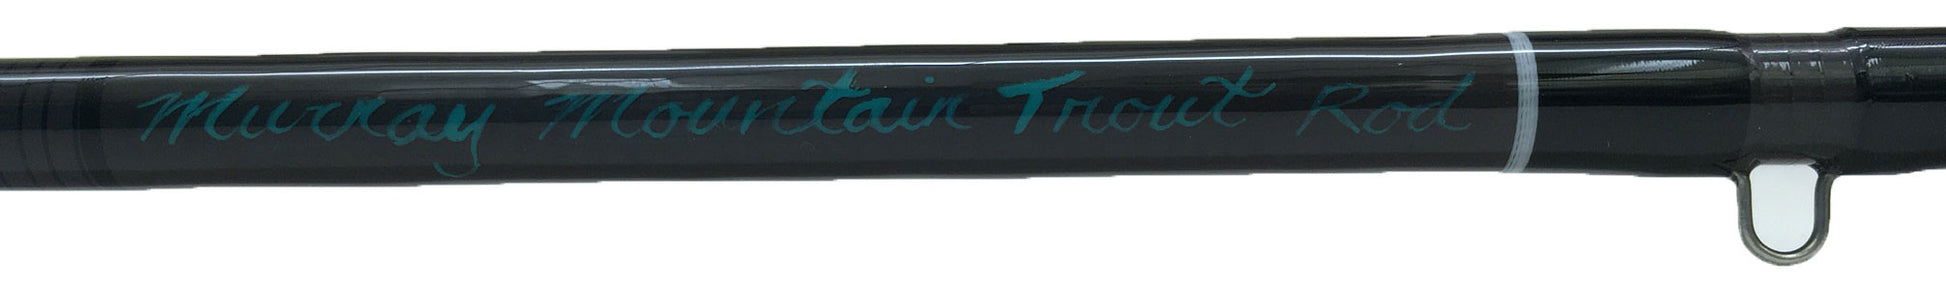 Mountain Trout Fly Rod Writing